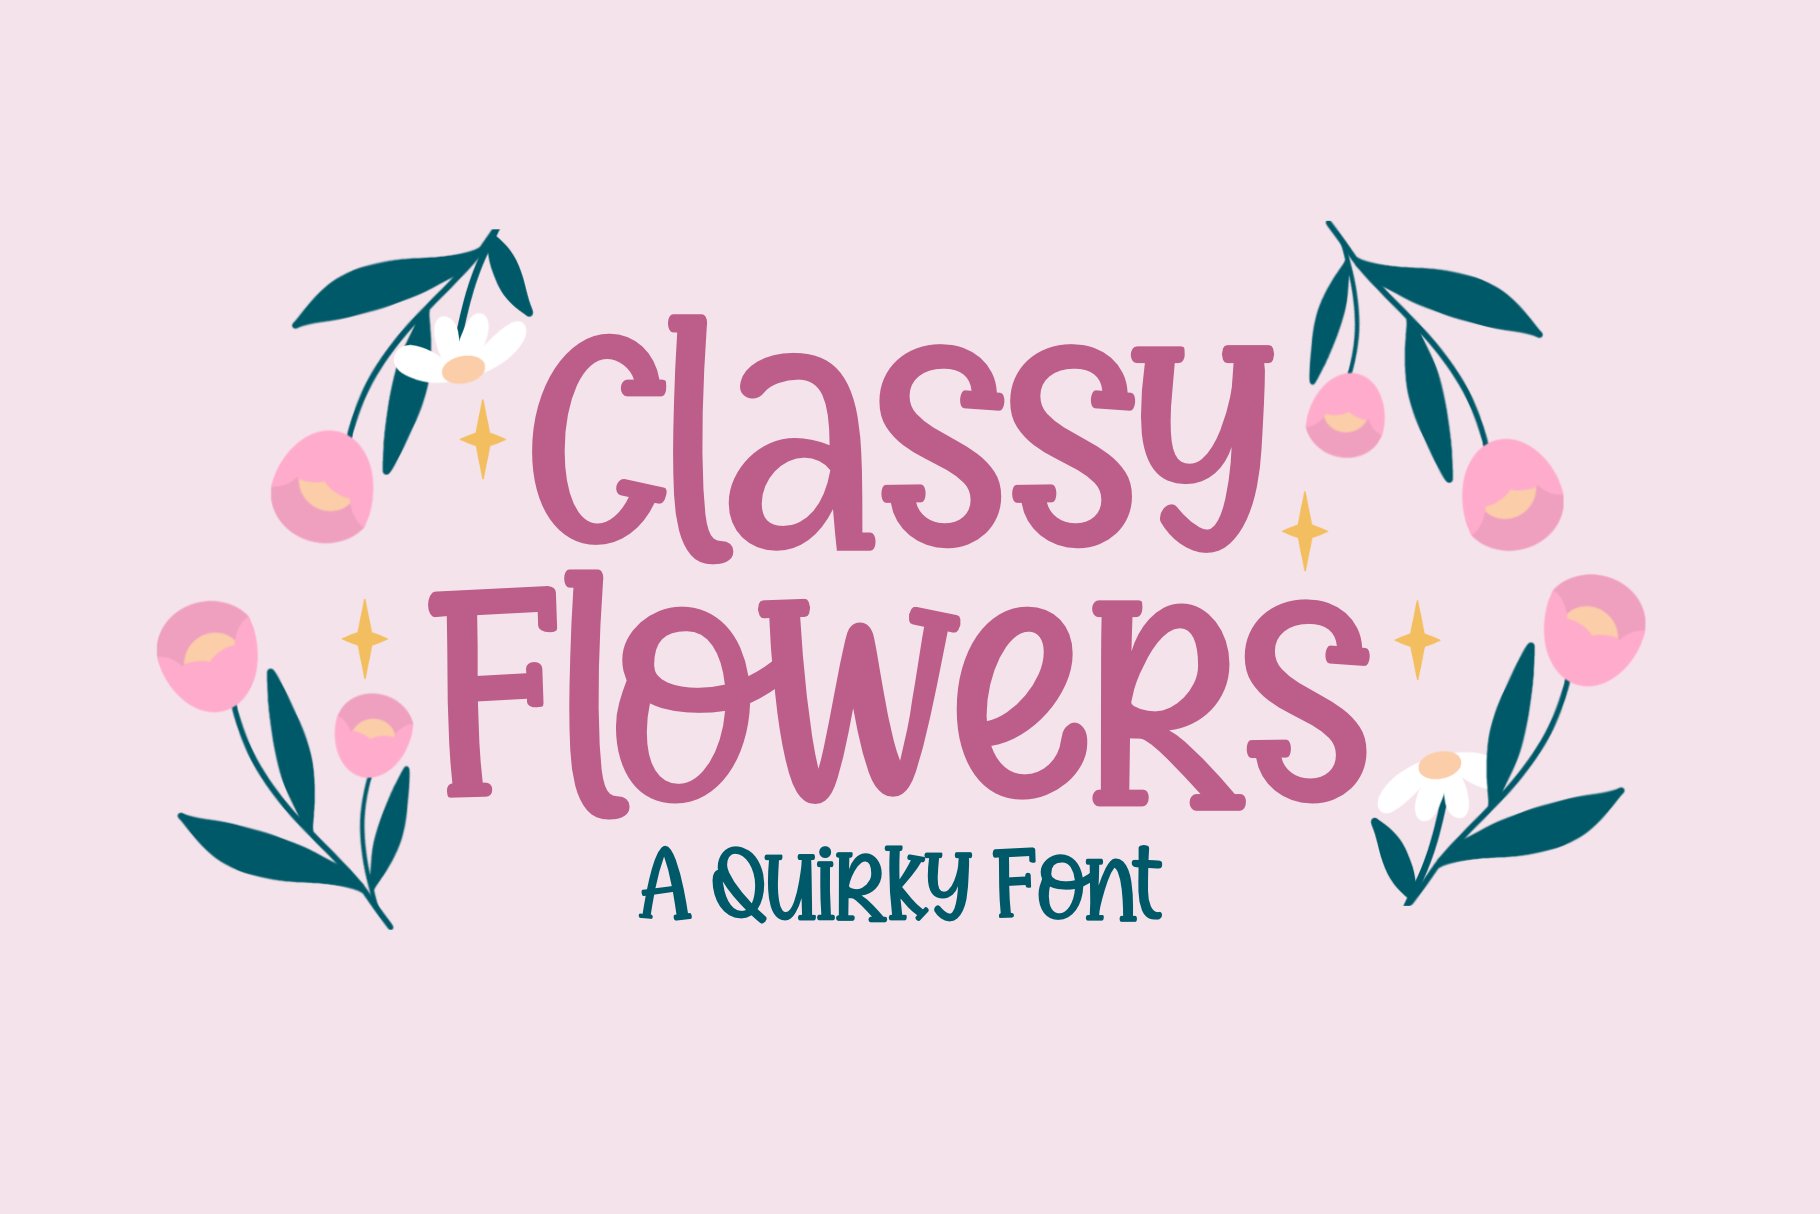 Classy Flowers - a Quirky Font cover image.